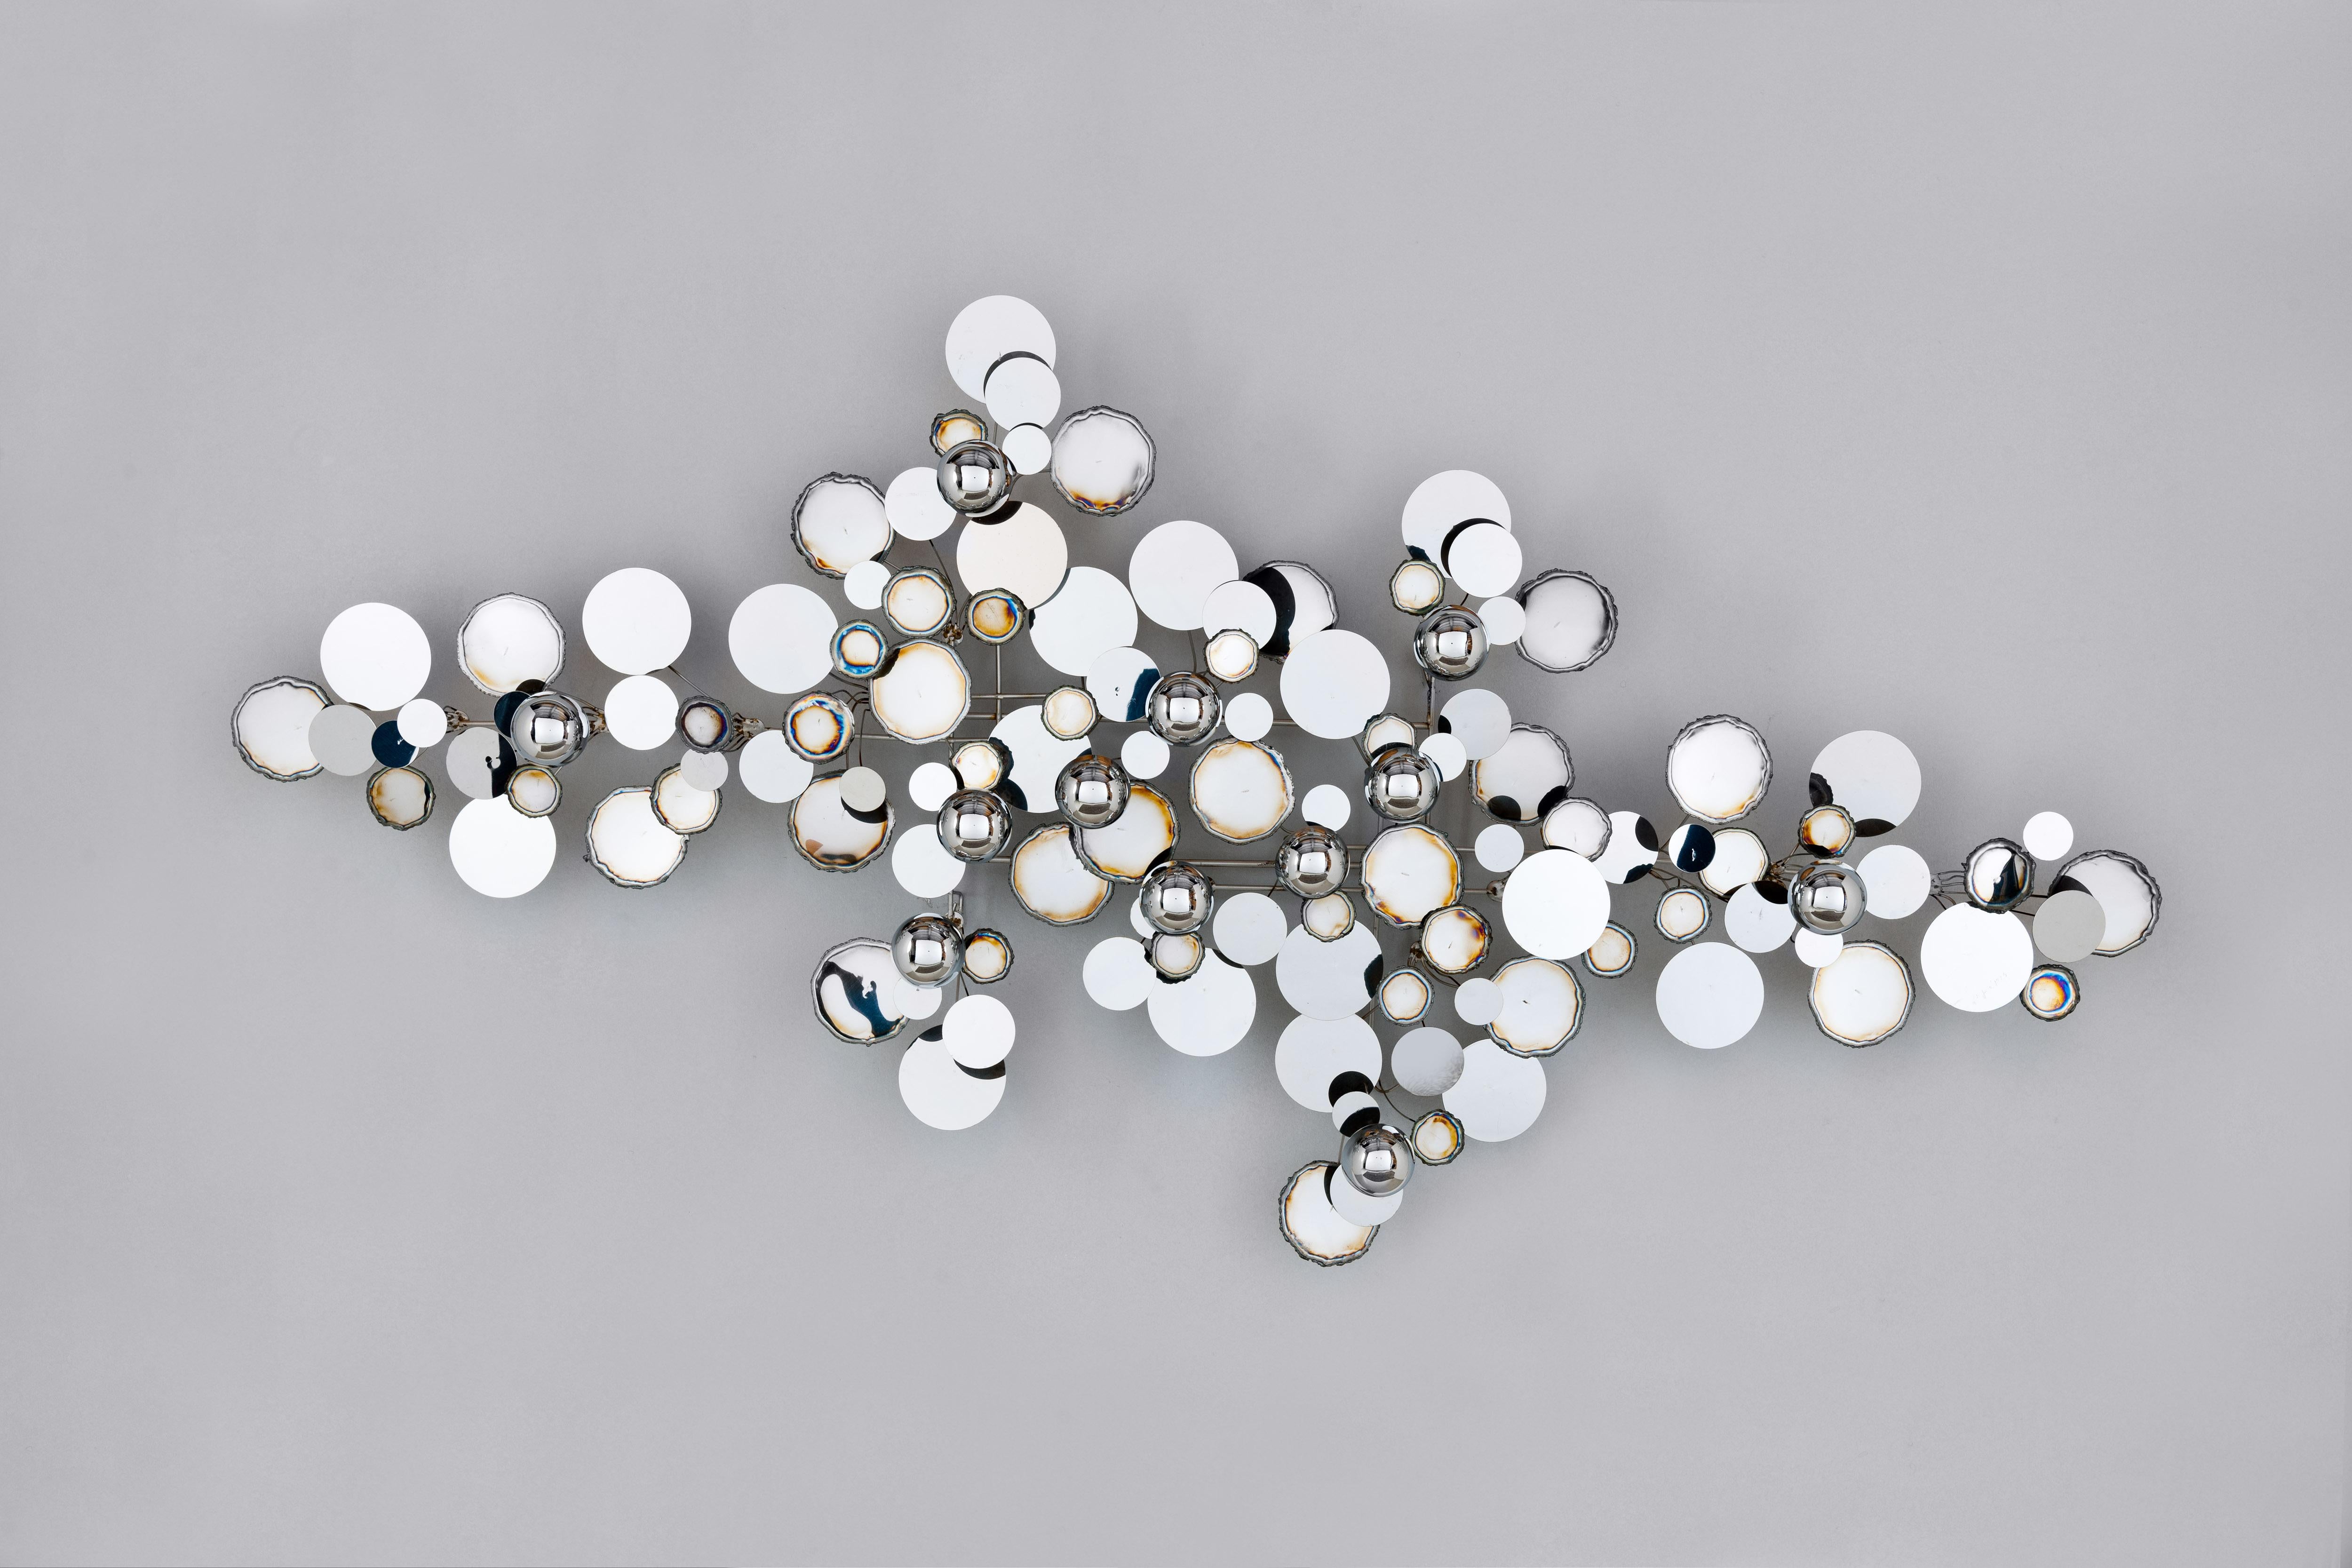 Iconic largest size vintage 'Raindrops' wall sculpture by C. Jere / Artisan House, in chrome execution. 
Abstract metal wall sculpture of torched edge disc's and half spheres made originally between 1965-1979. Object is fully signed 'C. Jere'